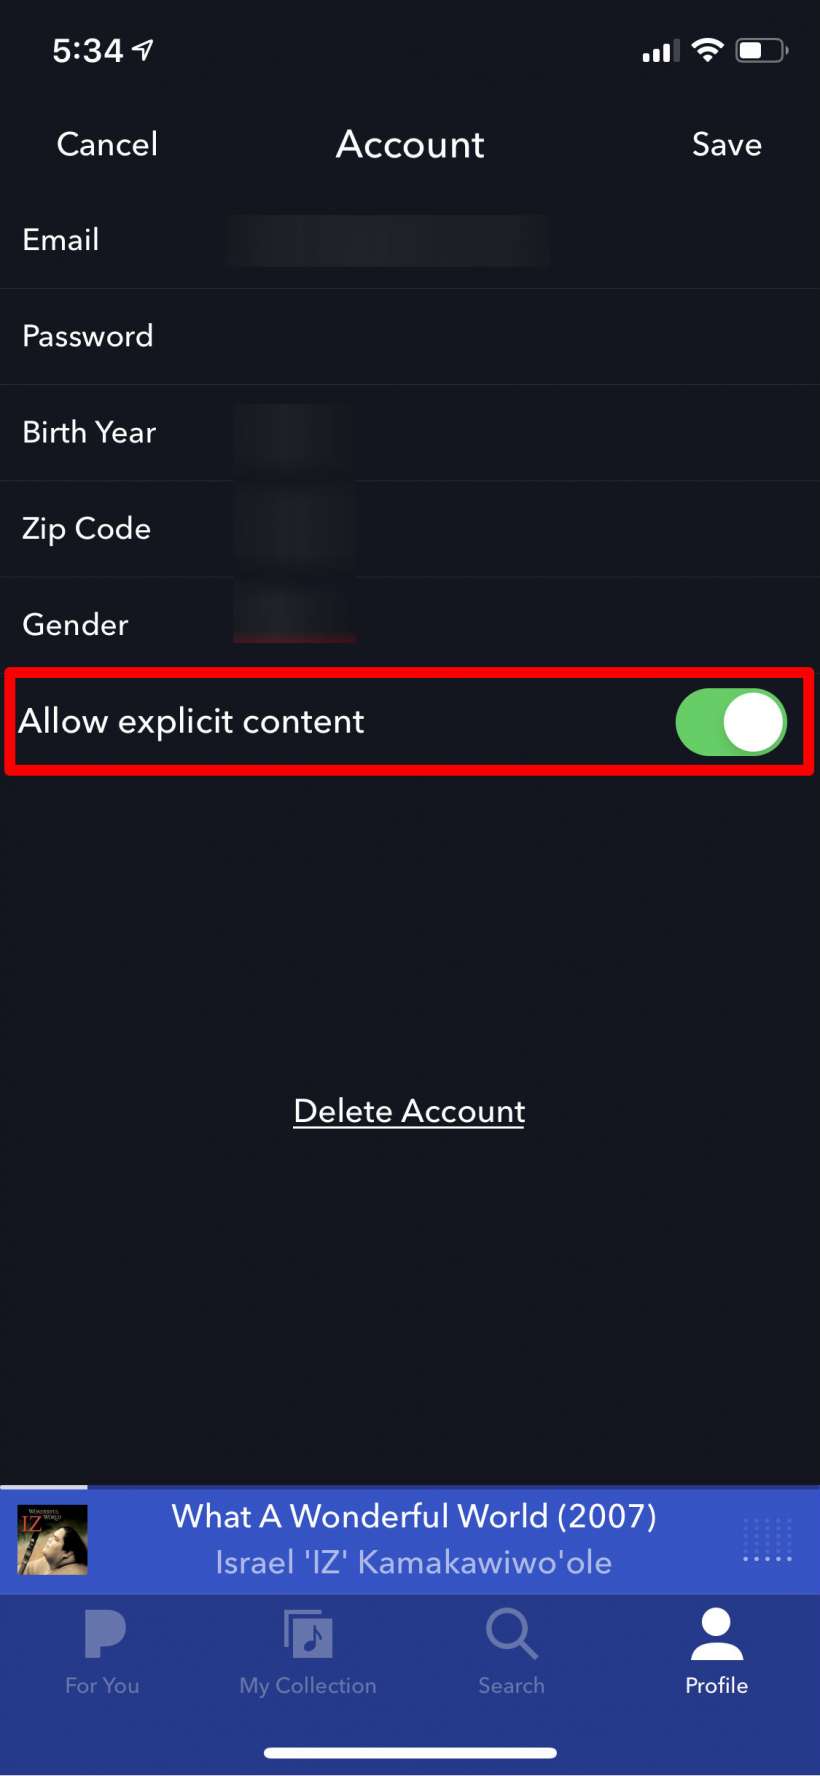 How to block explicit content and lyrics in music on Pandora on iPhone and iPad.